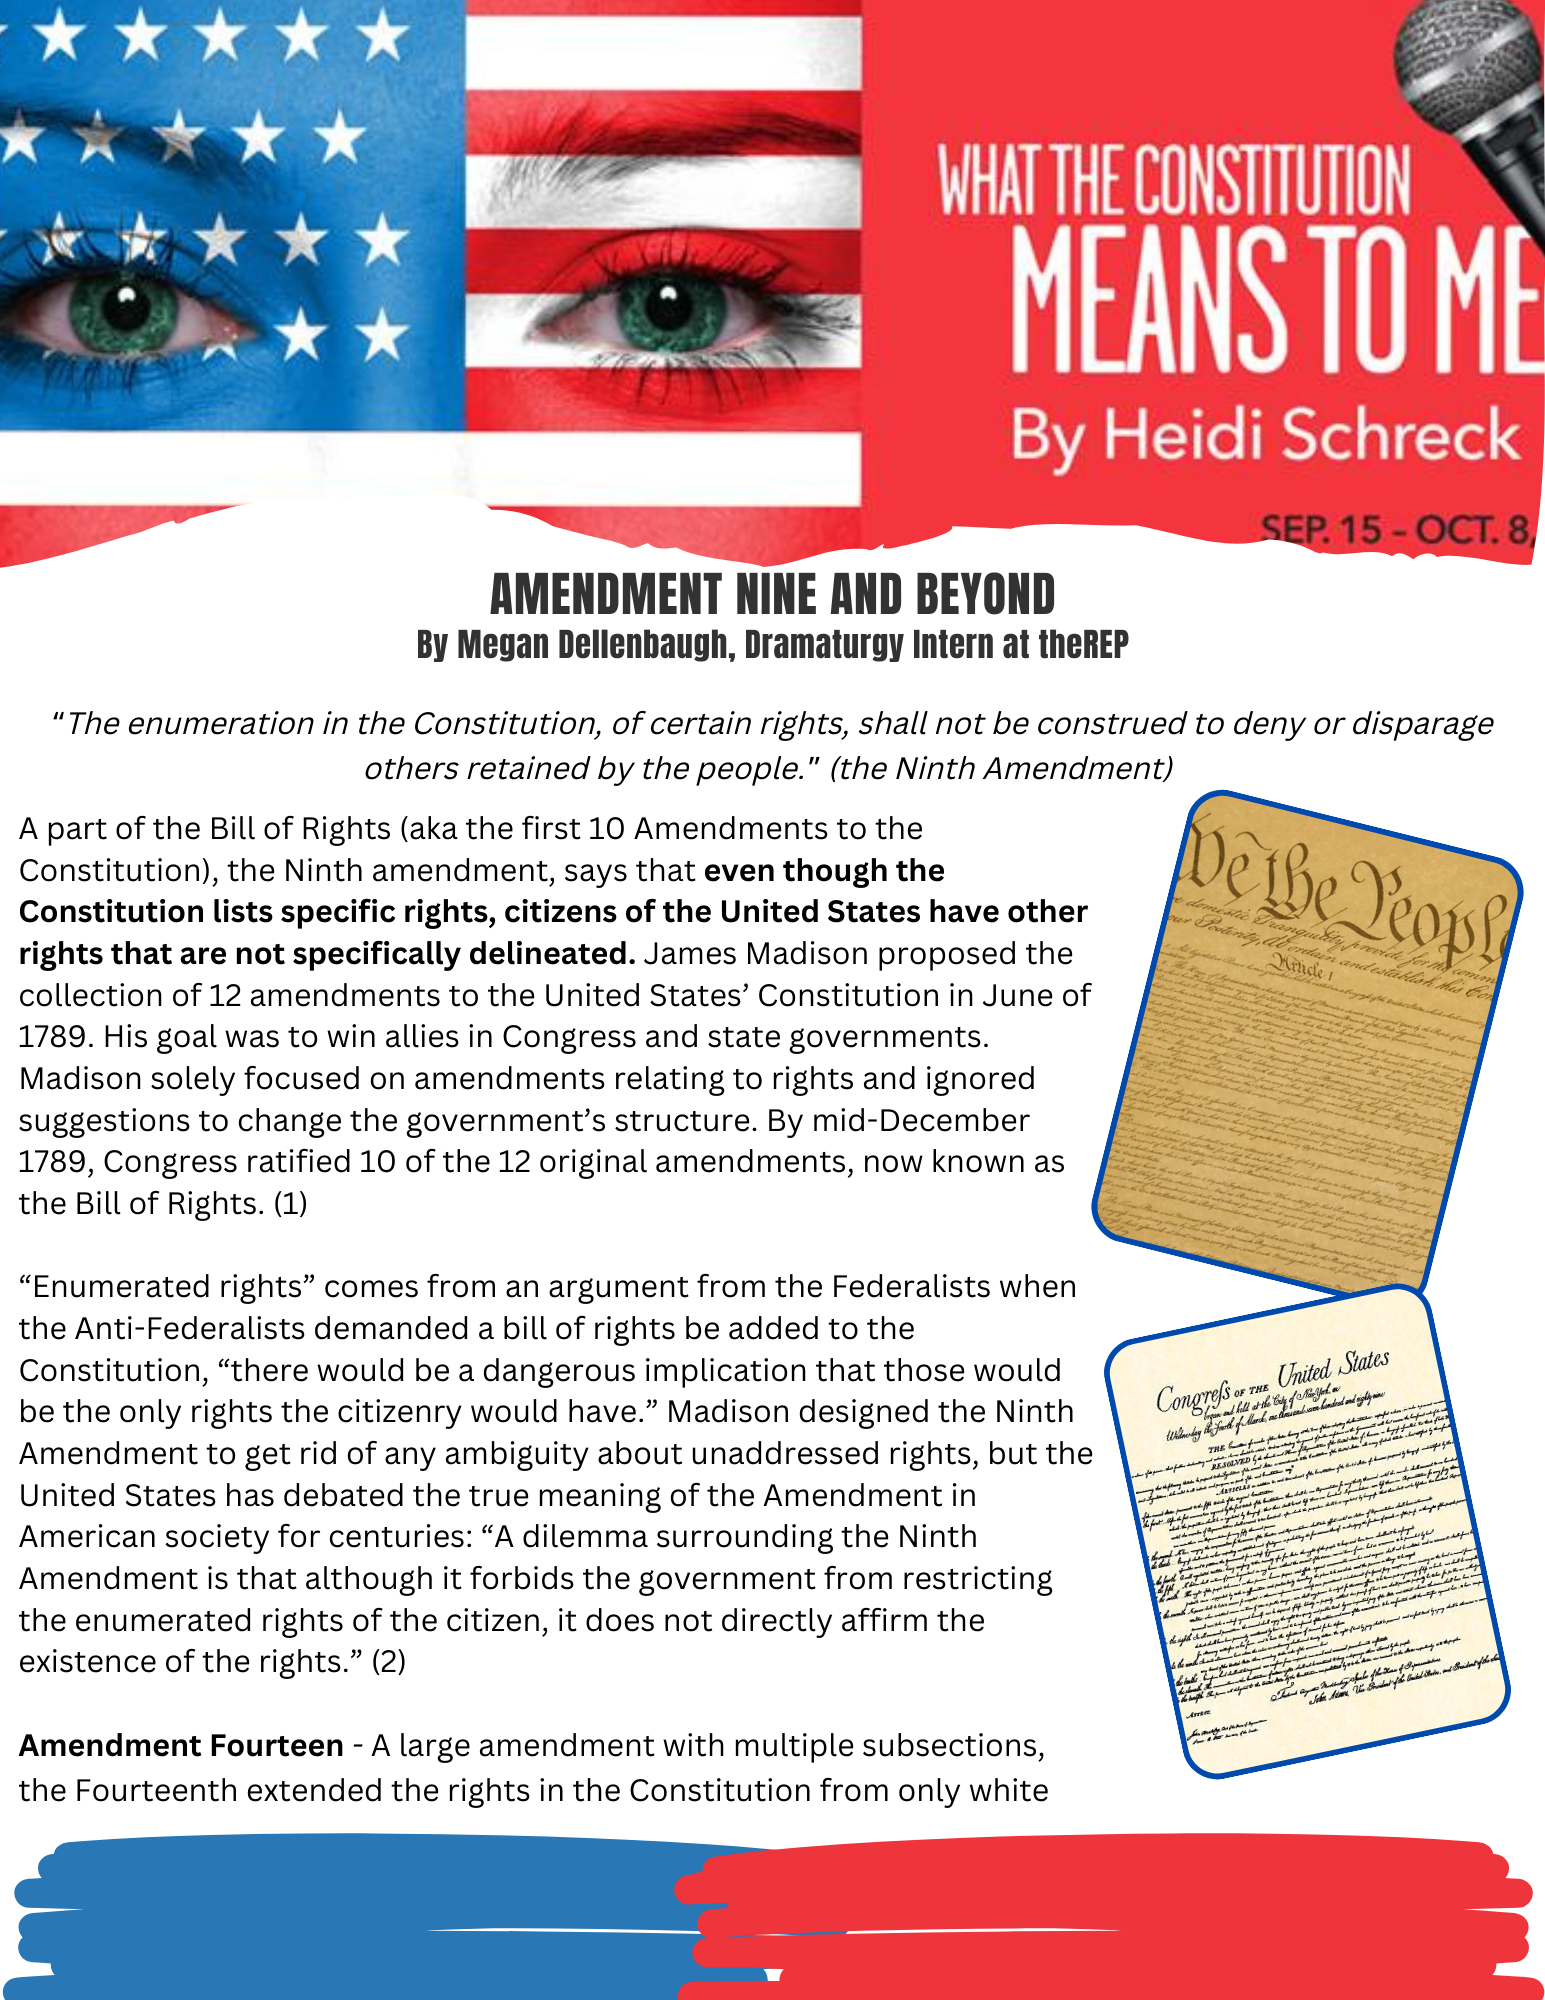 KCRep Presents: What the Constitution Means to Me